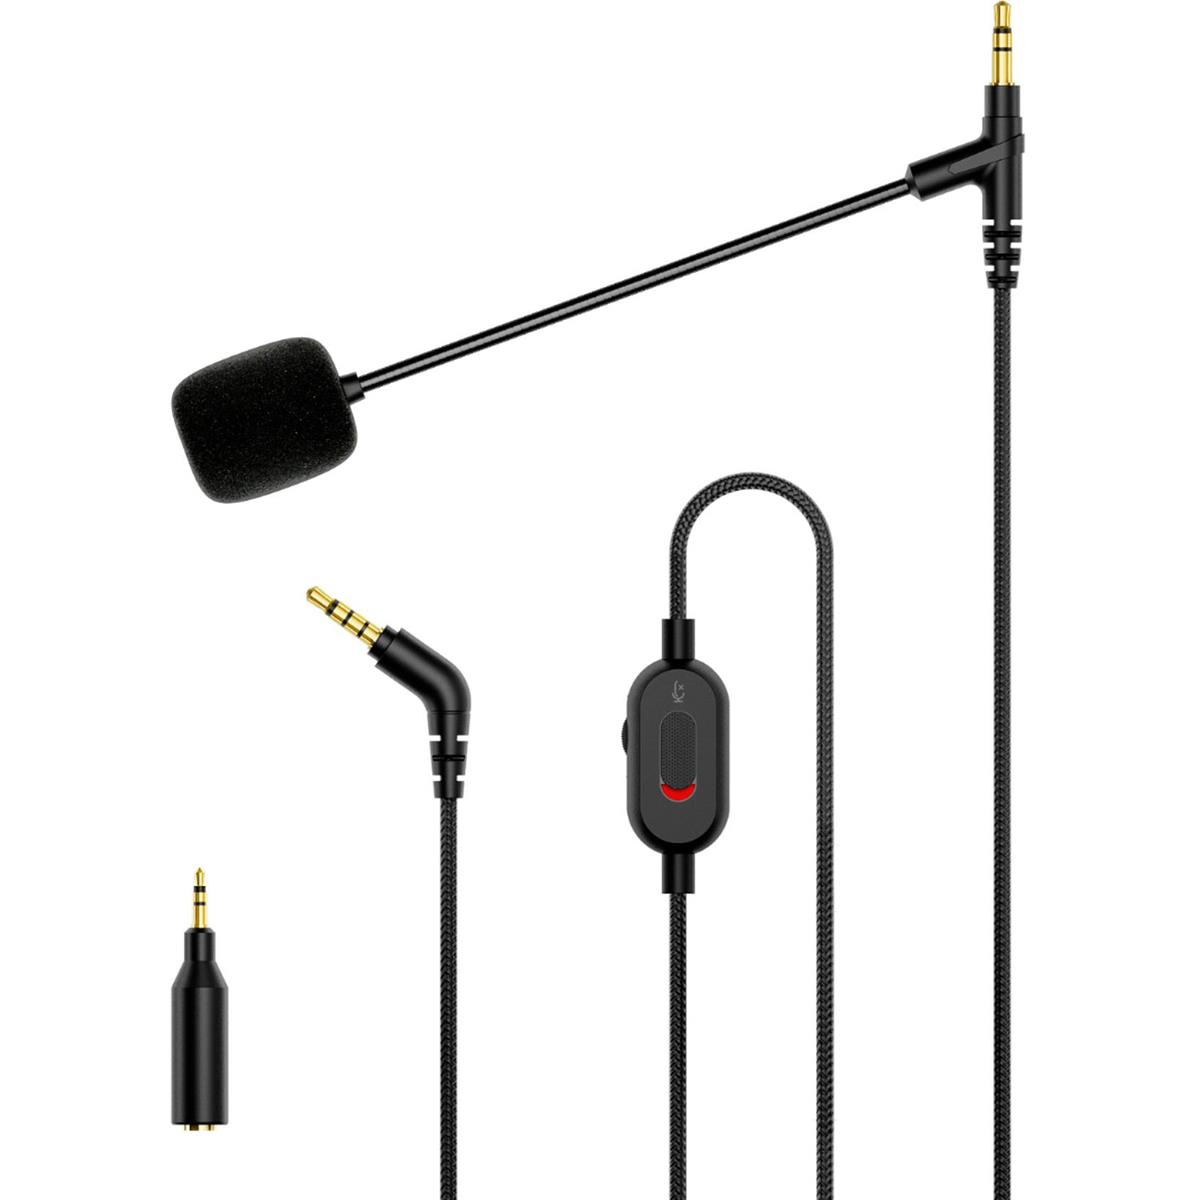 Image of MEE audio MEE Audio ClearSpeak Universal Headset Cable with Boom Microphone